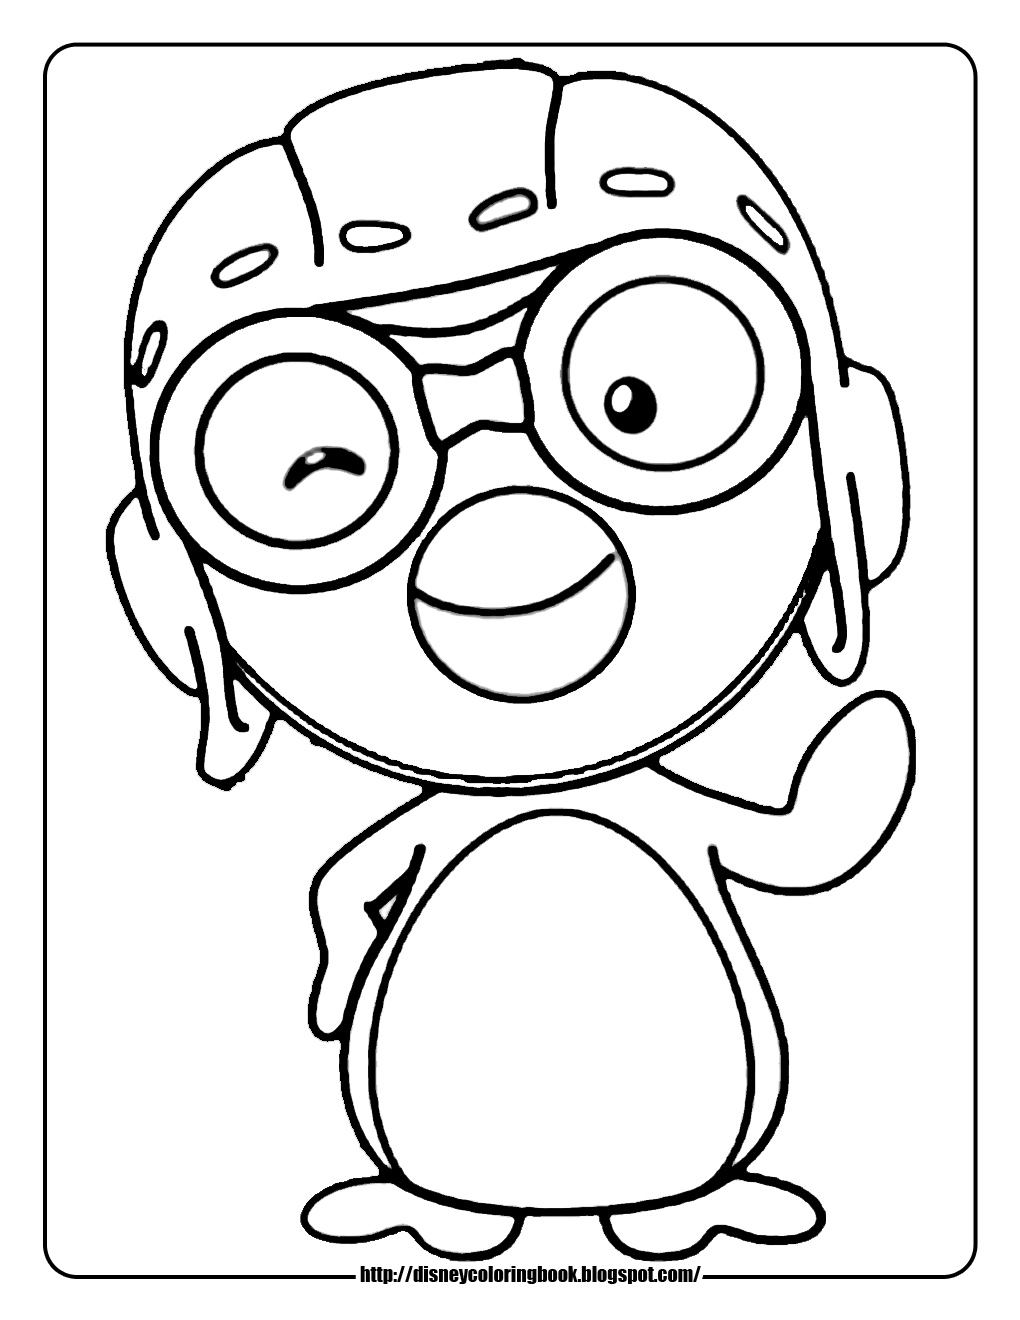 Pororo the Little Penguin: Free Disney Coloring Sheets | Coloring Pages